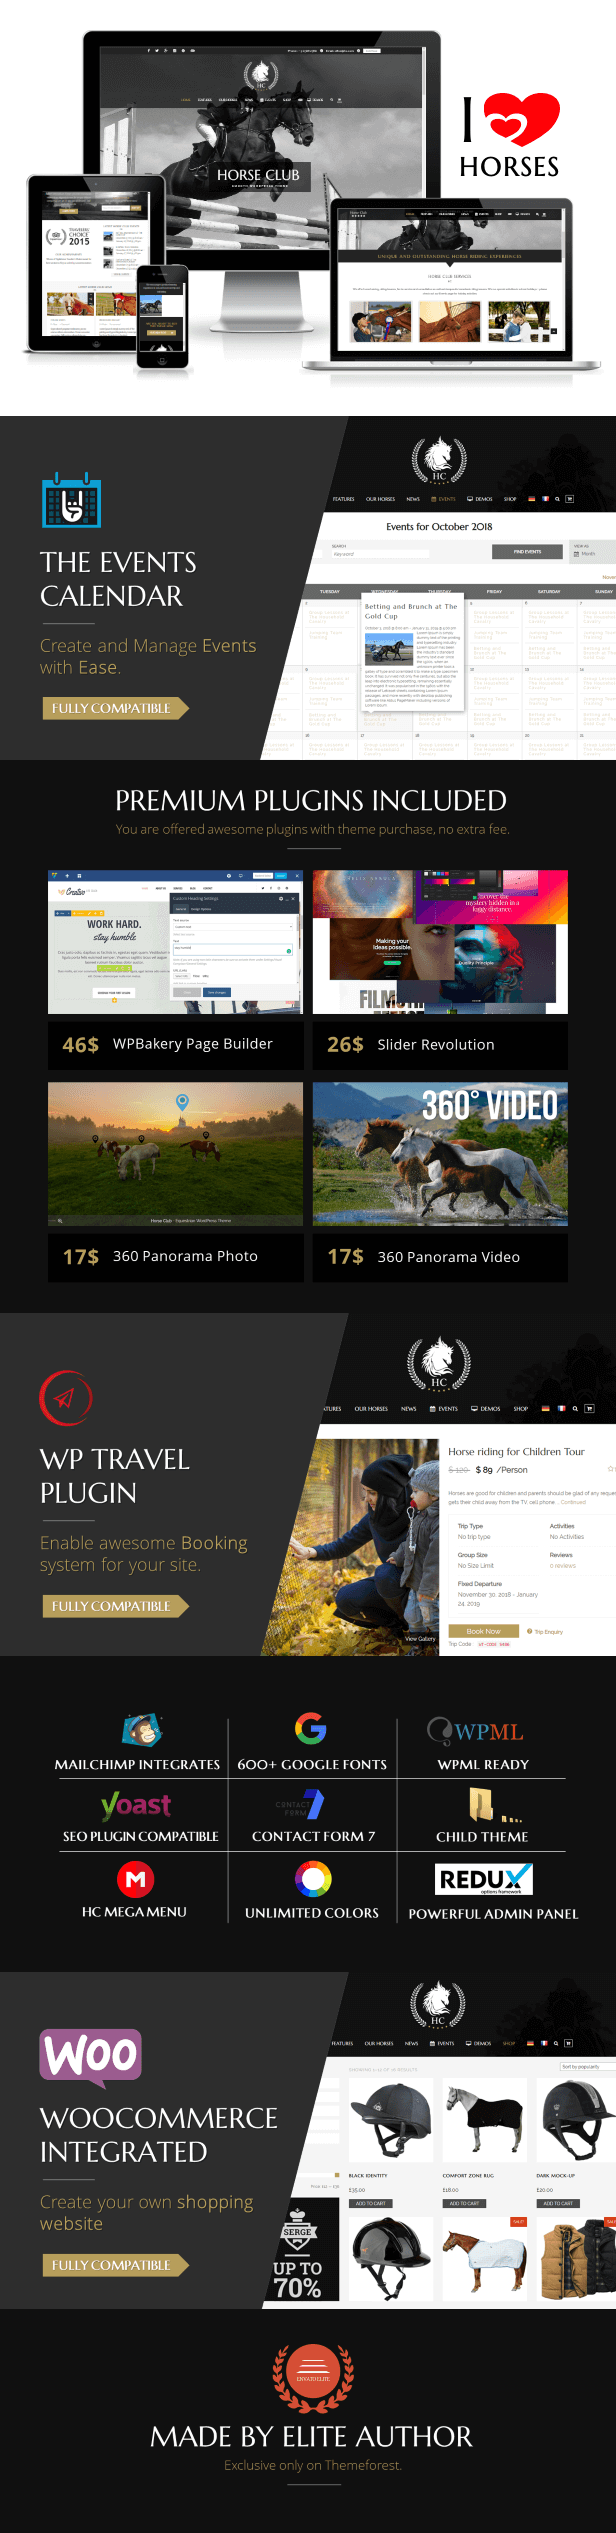 Horse Club - Equestrian WordPress Theme is made for riding stables, equestrian associations, horse riding, horse booking tour, lessons, horse school, equestrian centre, stable management,